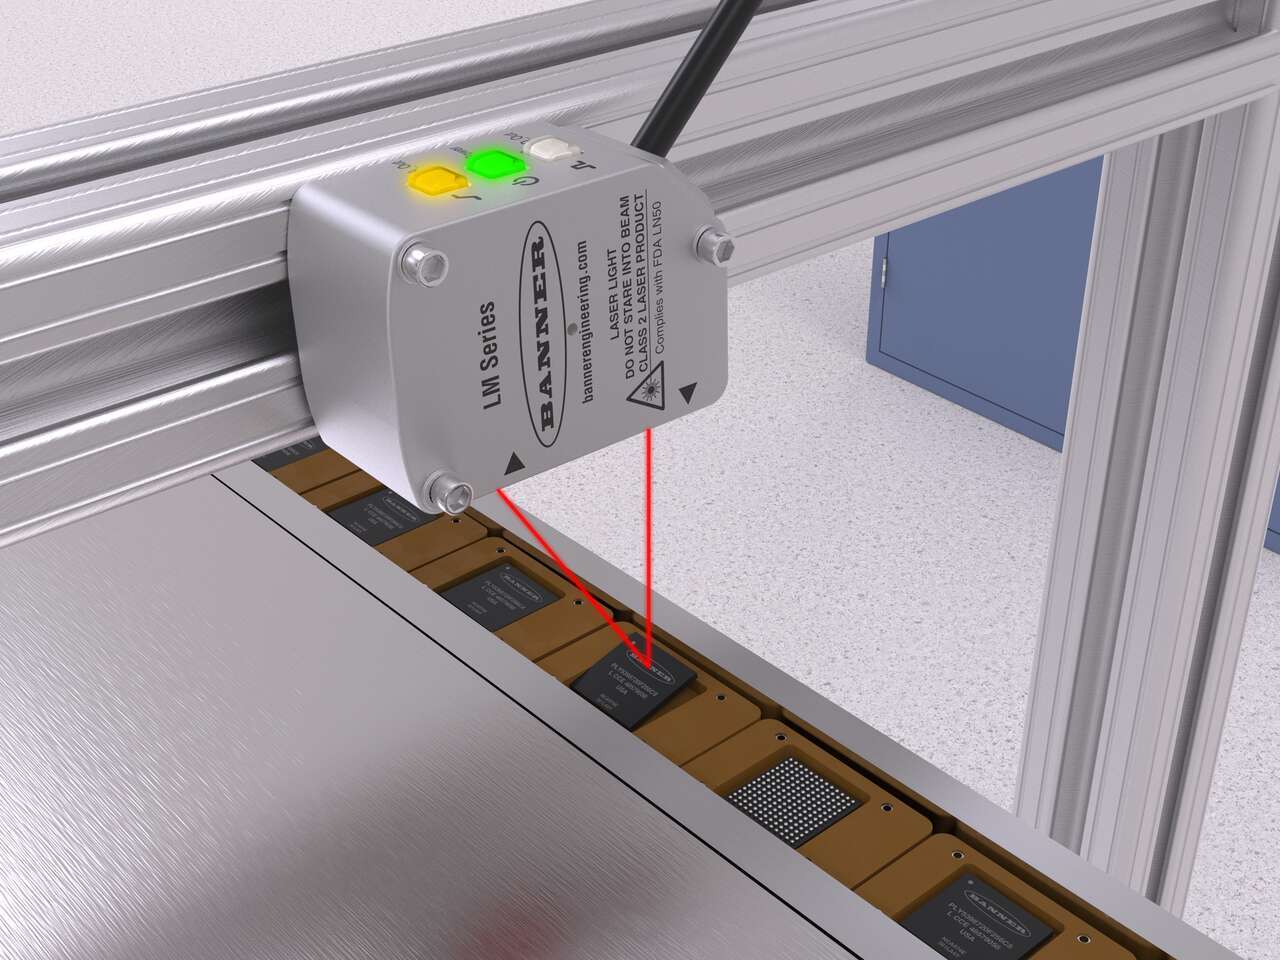 LM precision measurement sensor inspects IC chips seated in nests 